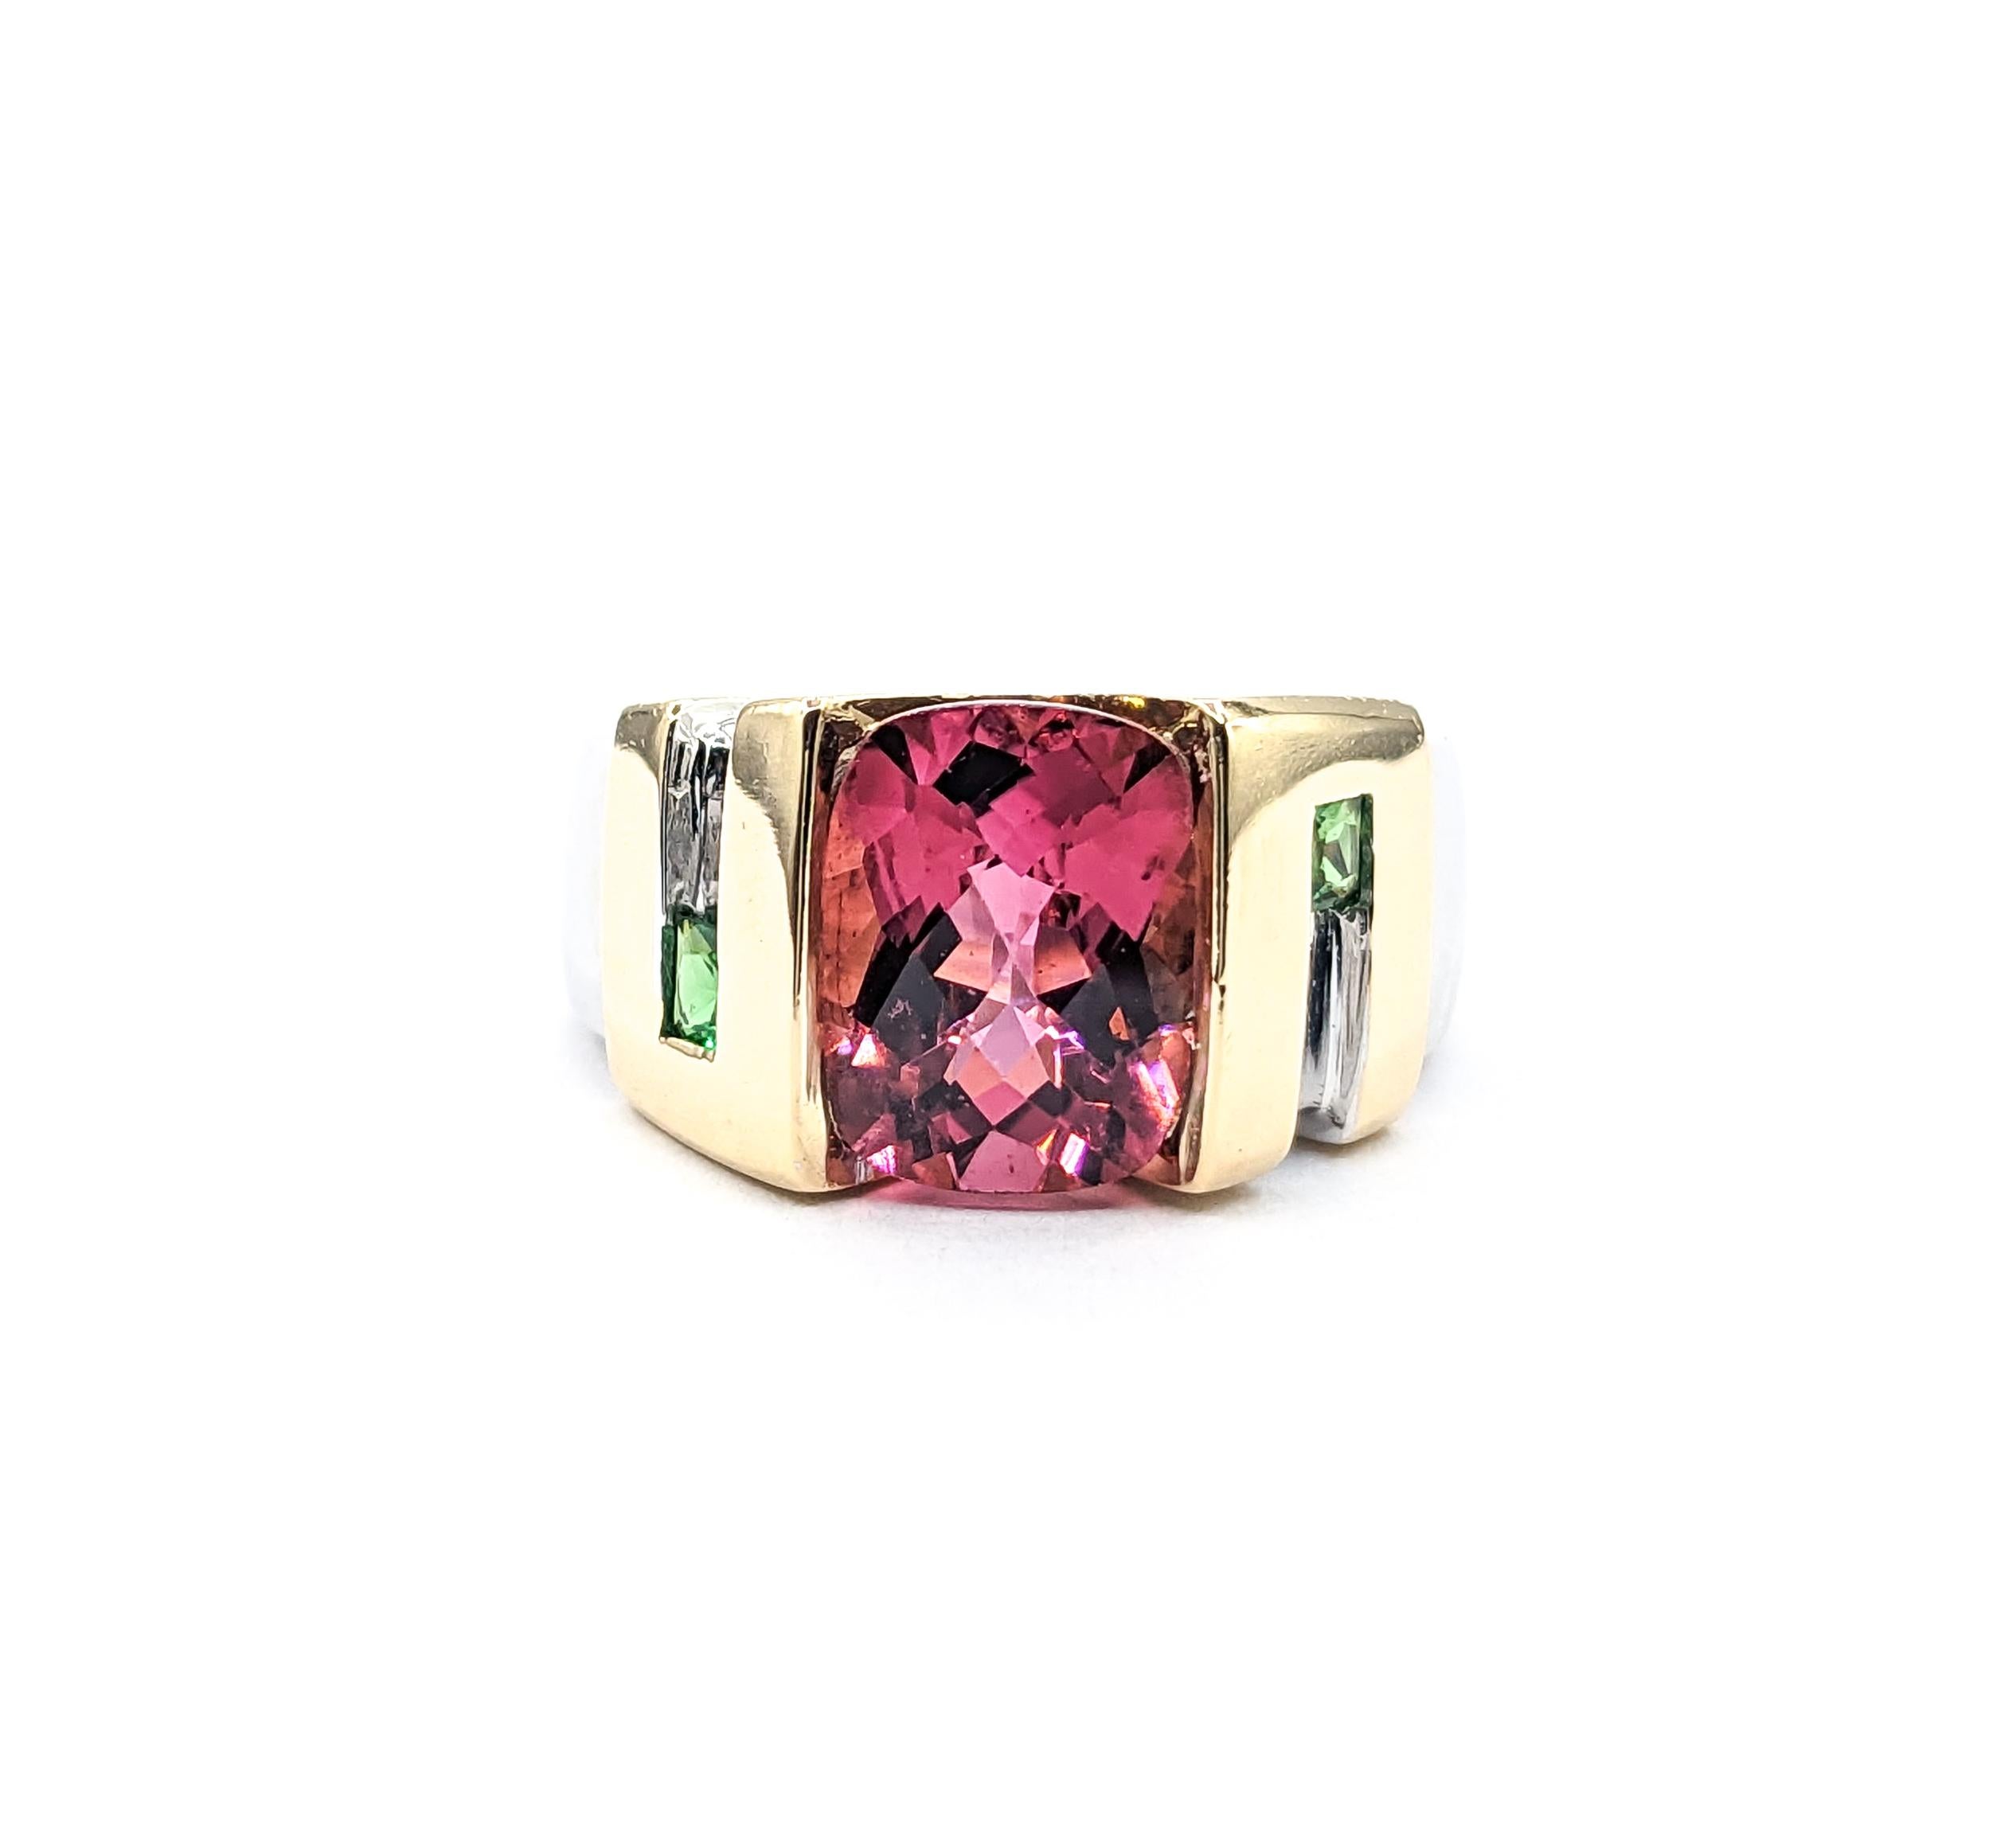 3.10ct cushion Pink Tourmaline & .18ctw Tsavorite Garnets Ring In Two-Tone Gold For Sale 4